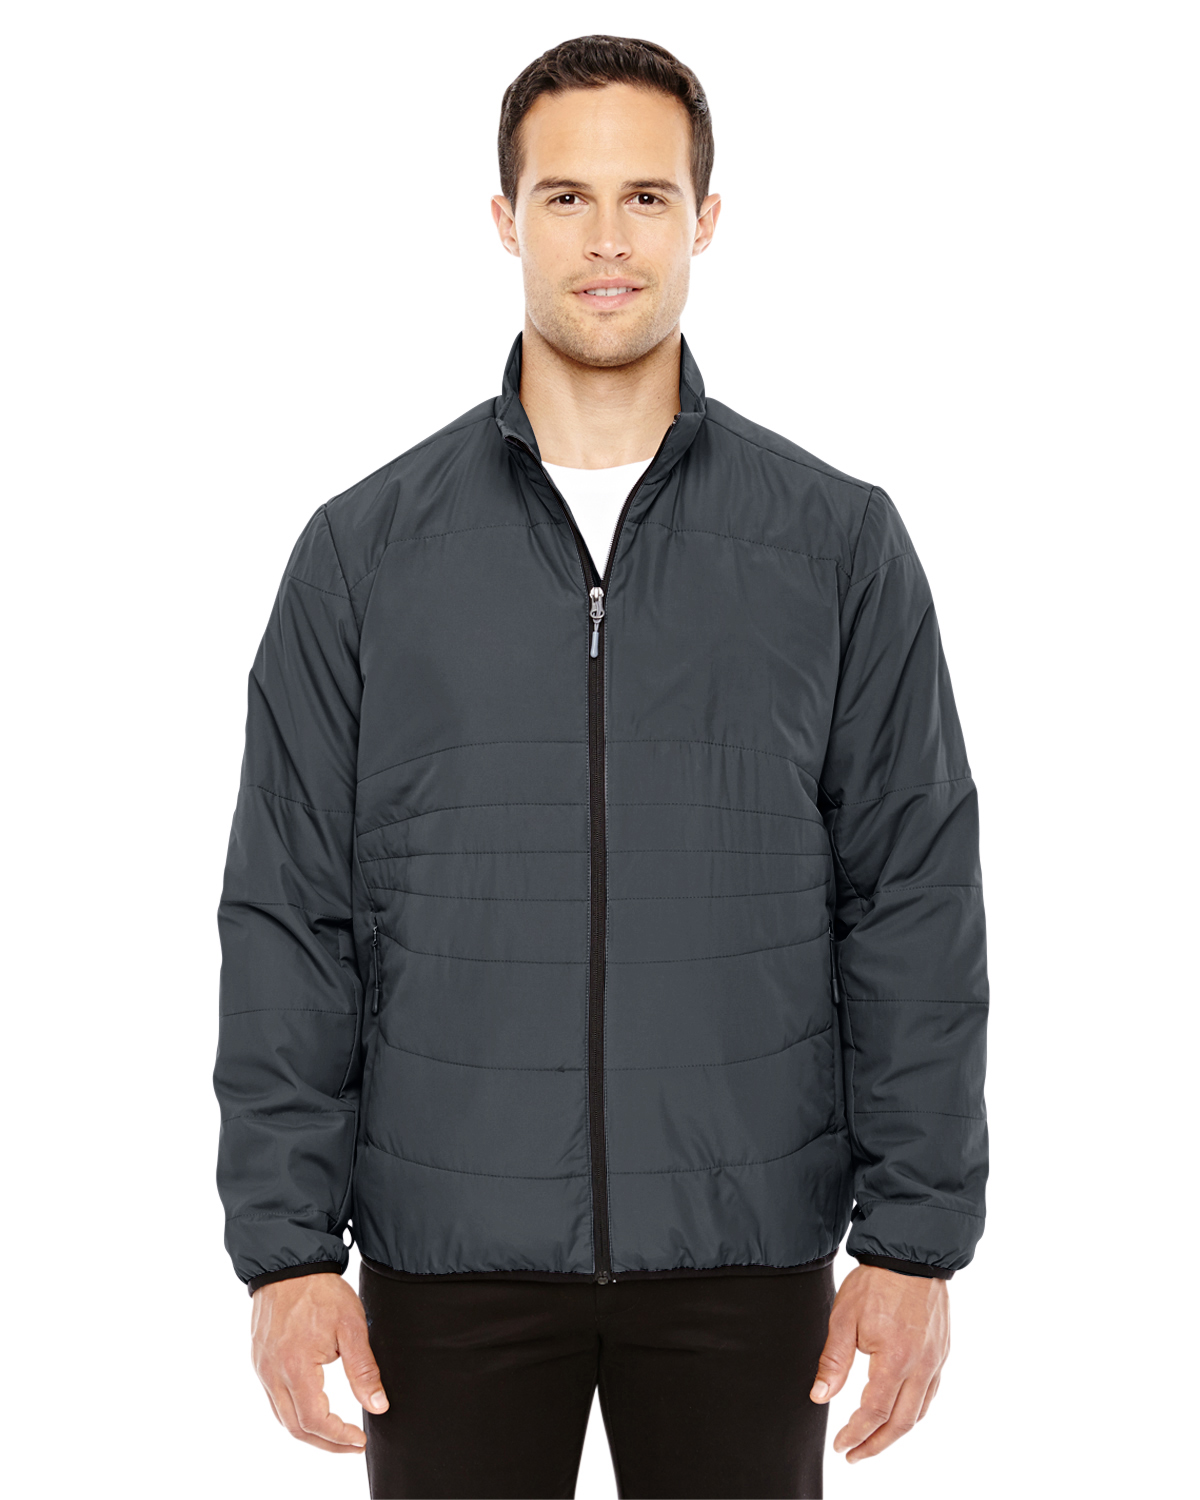 Ash City - North End 88231 - Men's Resolve Interactive Insulated Packable Jacket